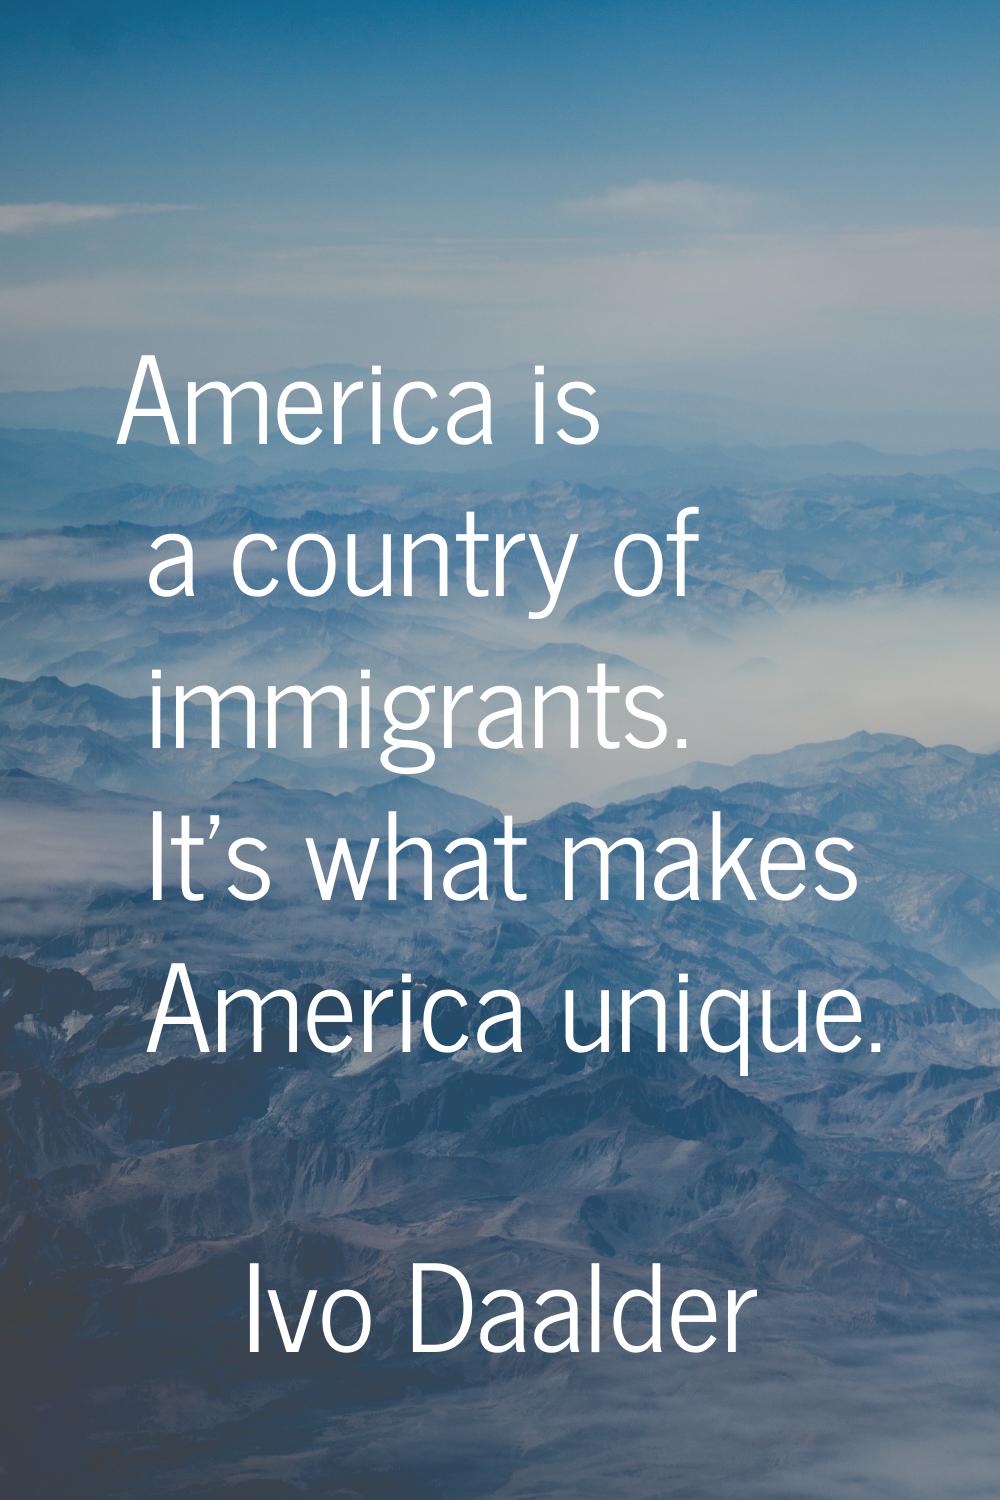 America is a country of immigrants. It's what makes America unique.